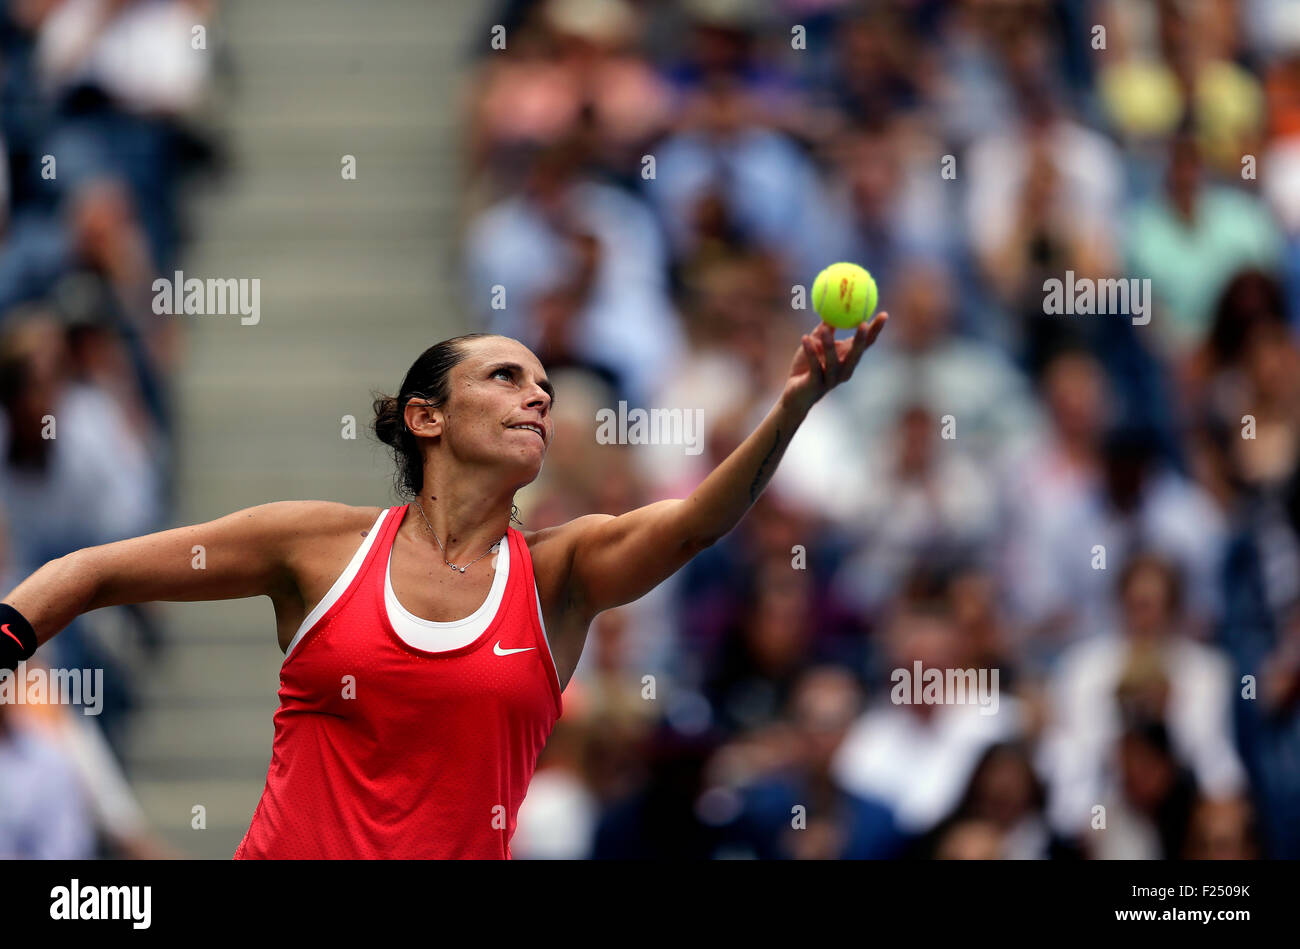 Flushing Meadows, New York, USA. 11th Sep, 2015. Roberta Vinci of Italy during her upset victory over Serena Williams in their semifinal match at the U.S. Open in Flushing Meadows, New York on the afternoon of September 11th, 2015.  Vinci won the match 2-6, 6-4, 6-4. Credit:  Adam Stoltman/Alamy Live News Stock Photo